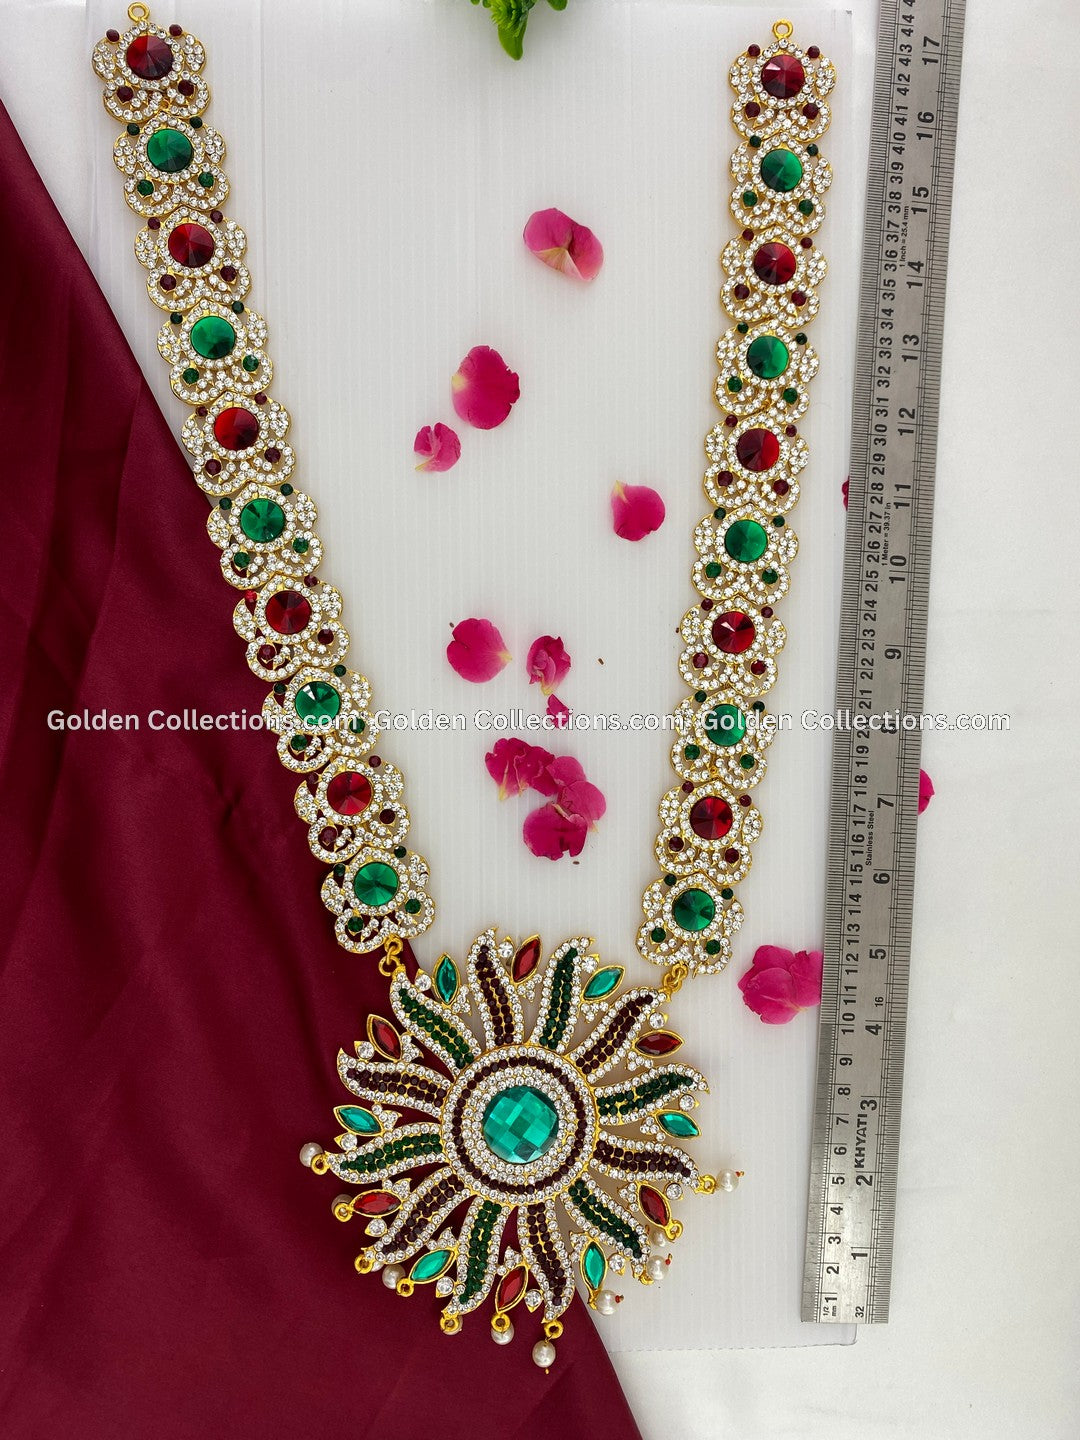 Deity Decorative Long Necklace- Divine Beauty at GoldenCollections 2